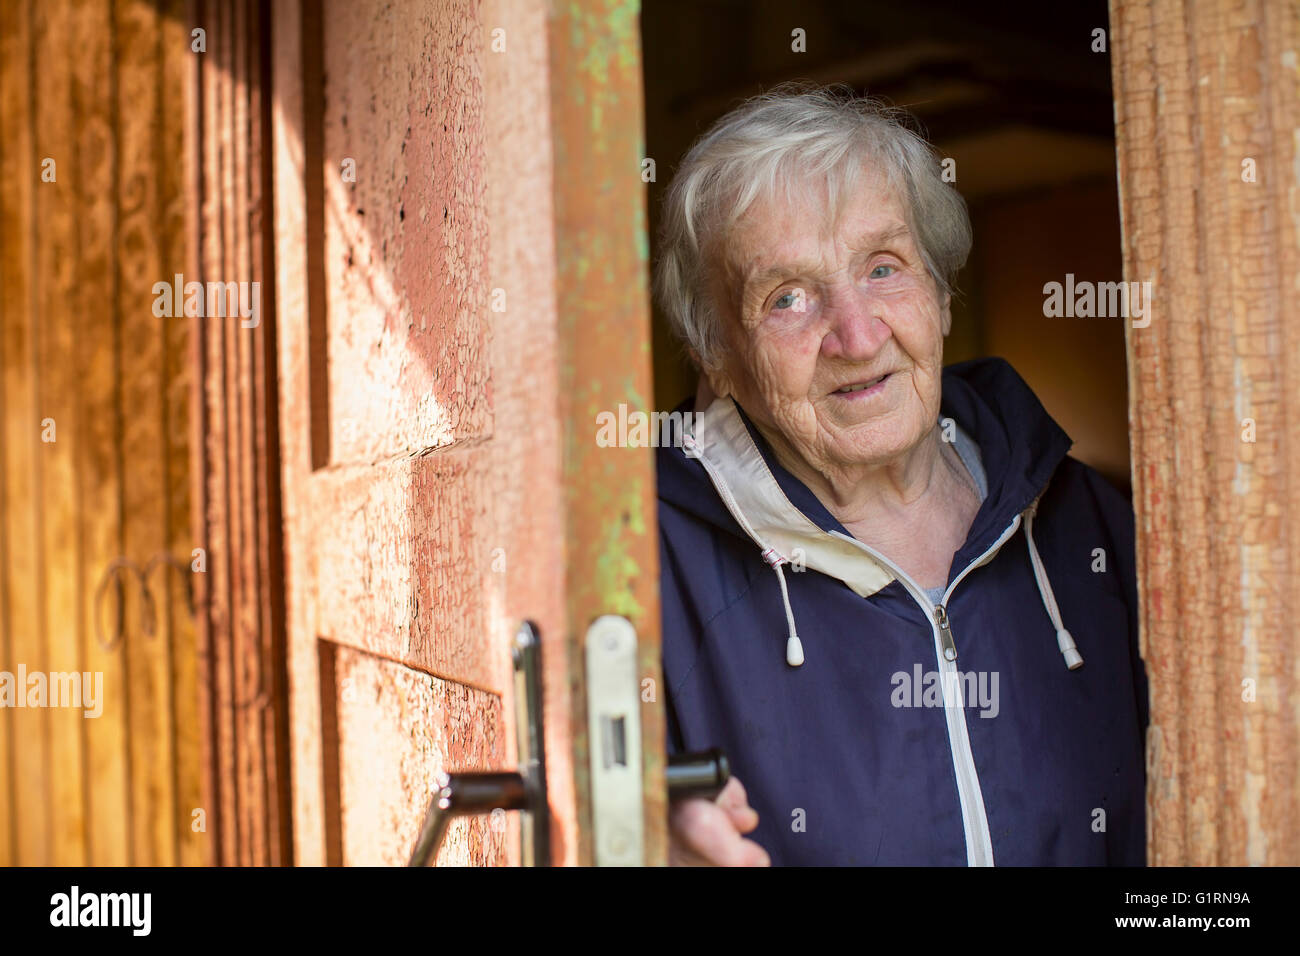 An elderly woman opens the door of the house. Stock Photo